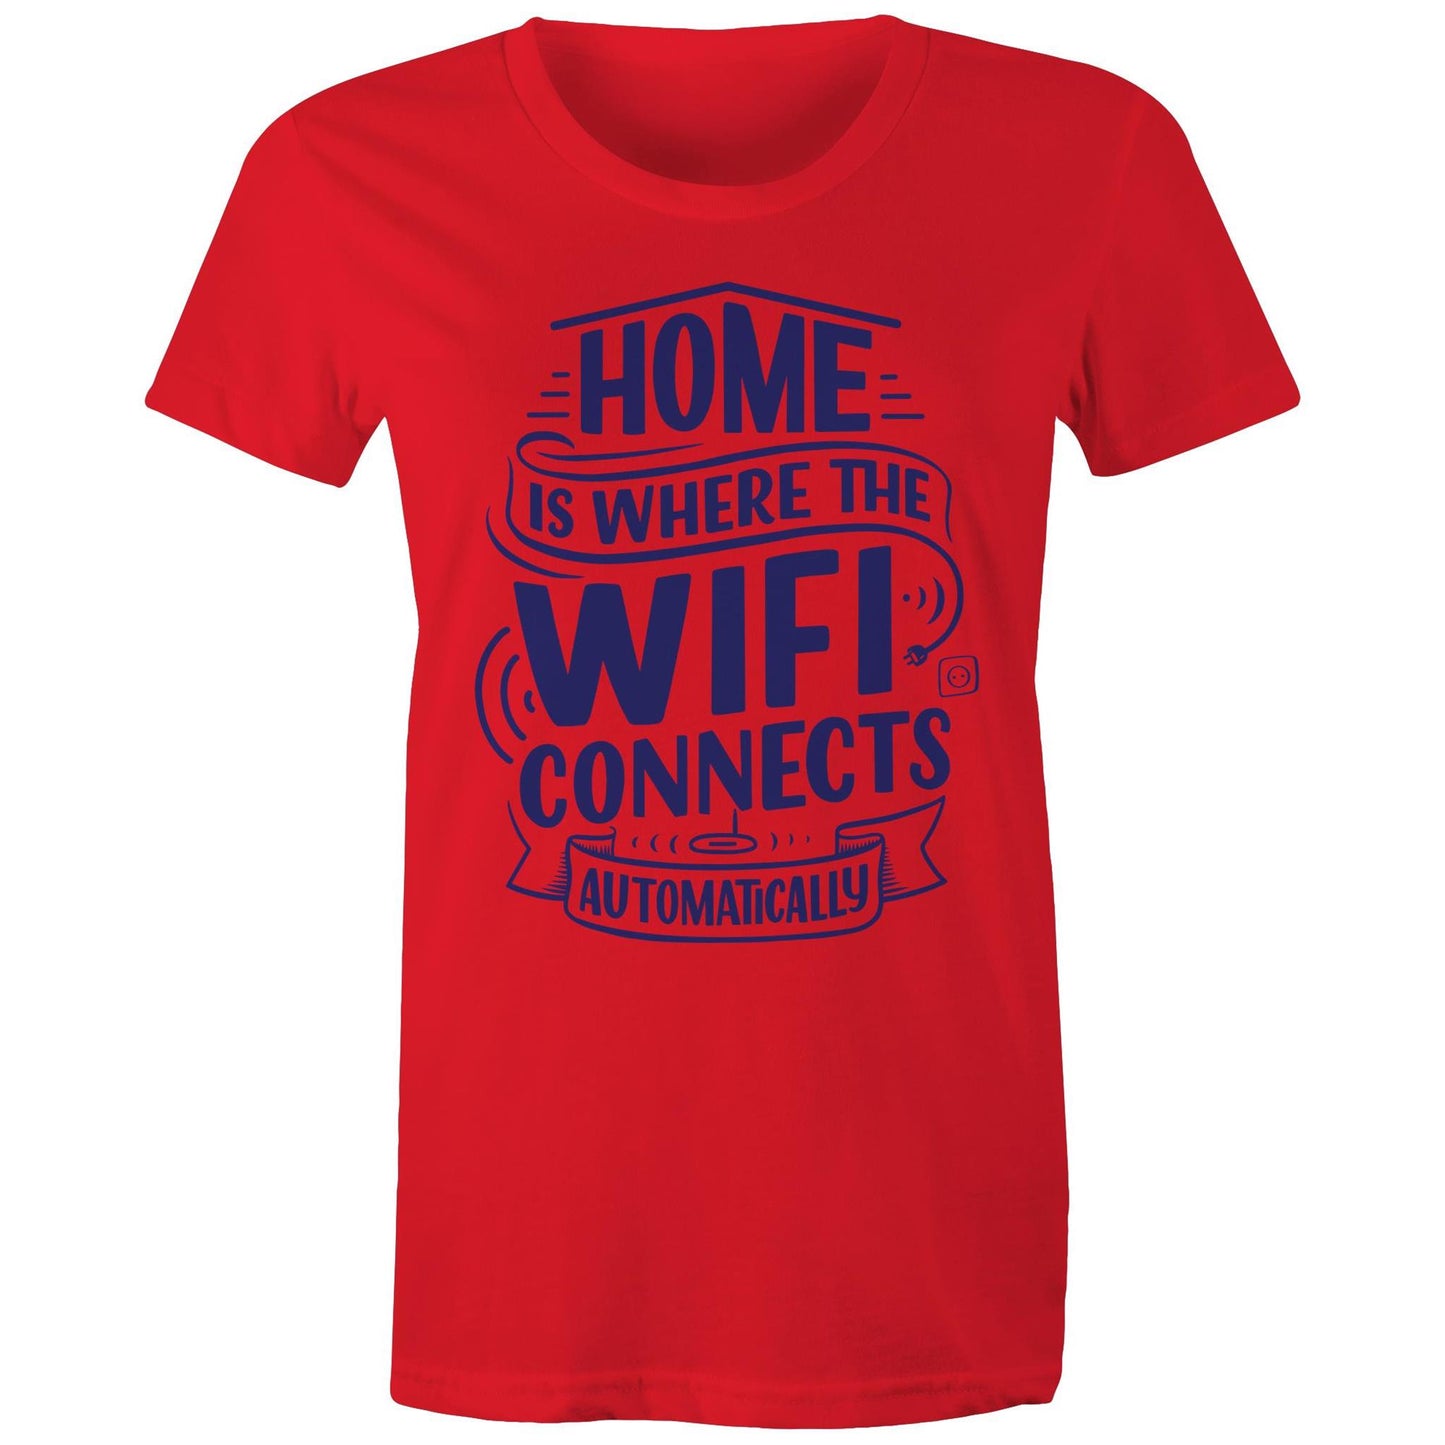 Home Is Where The WIFI Connects Automatically - Womens T-shirt Red Womens T-shirt Tech